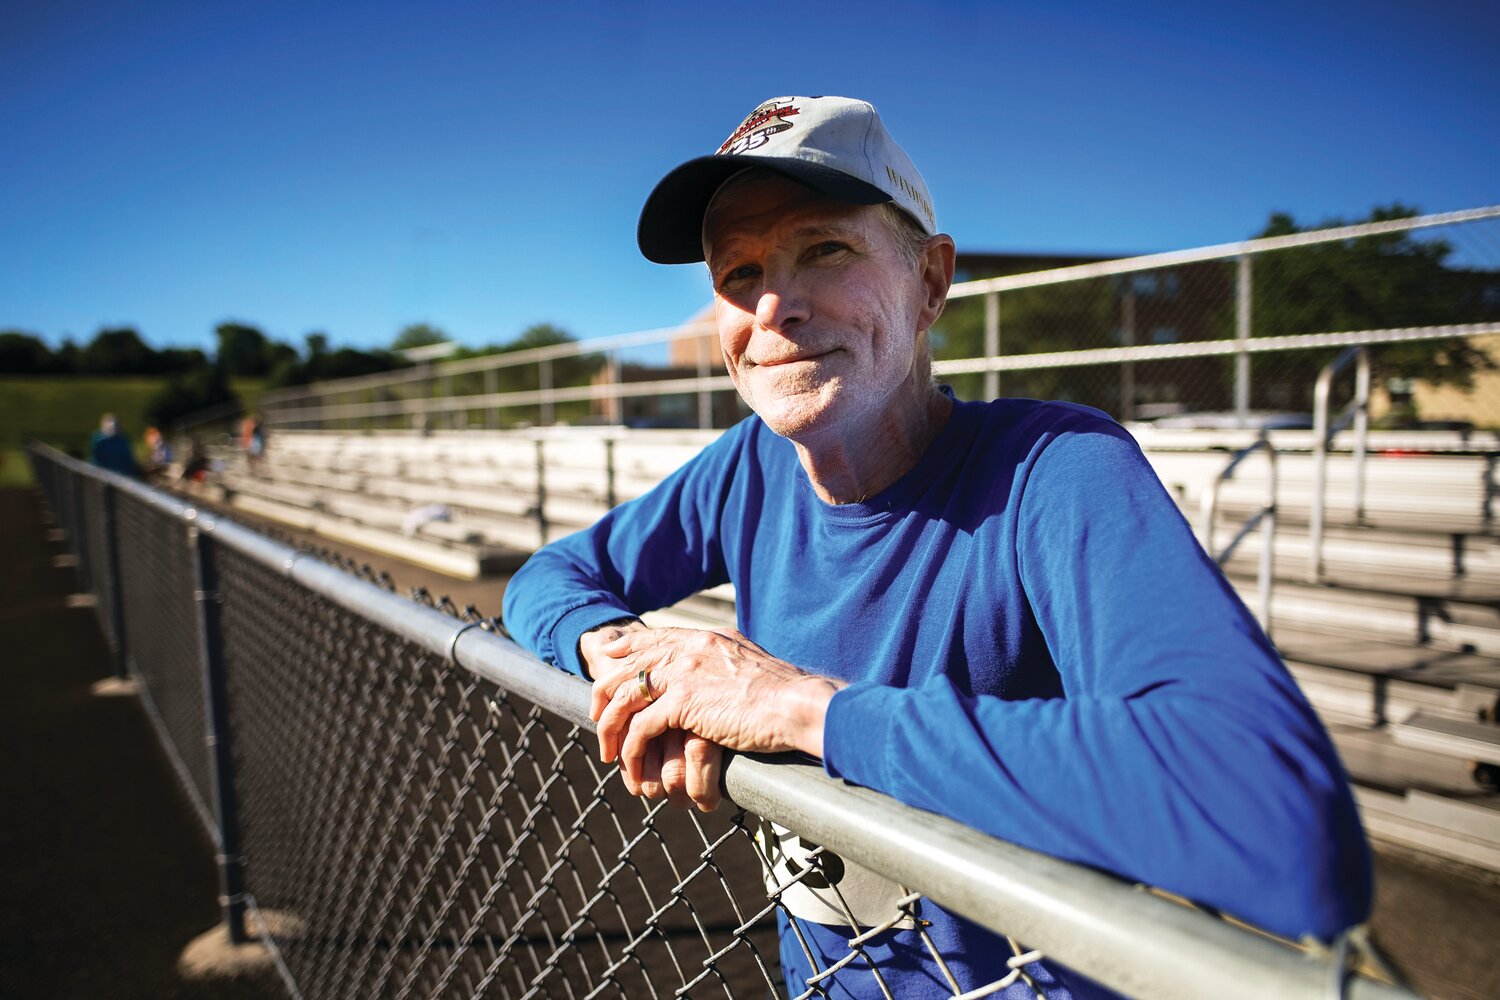 Will Kirk is all smiles before the start of the Bucks County Senior Games track and field events June 8.